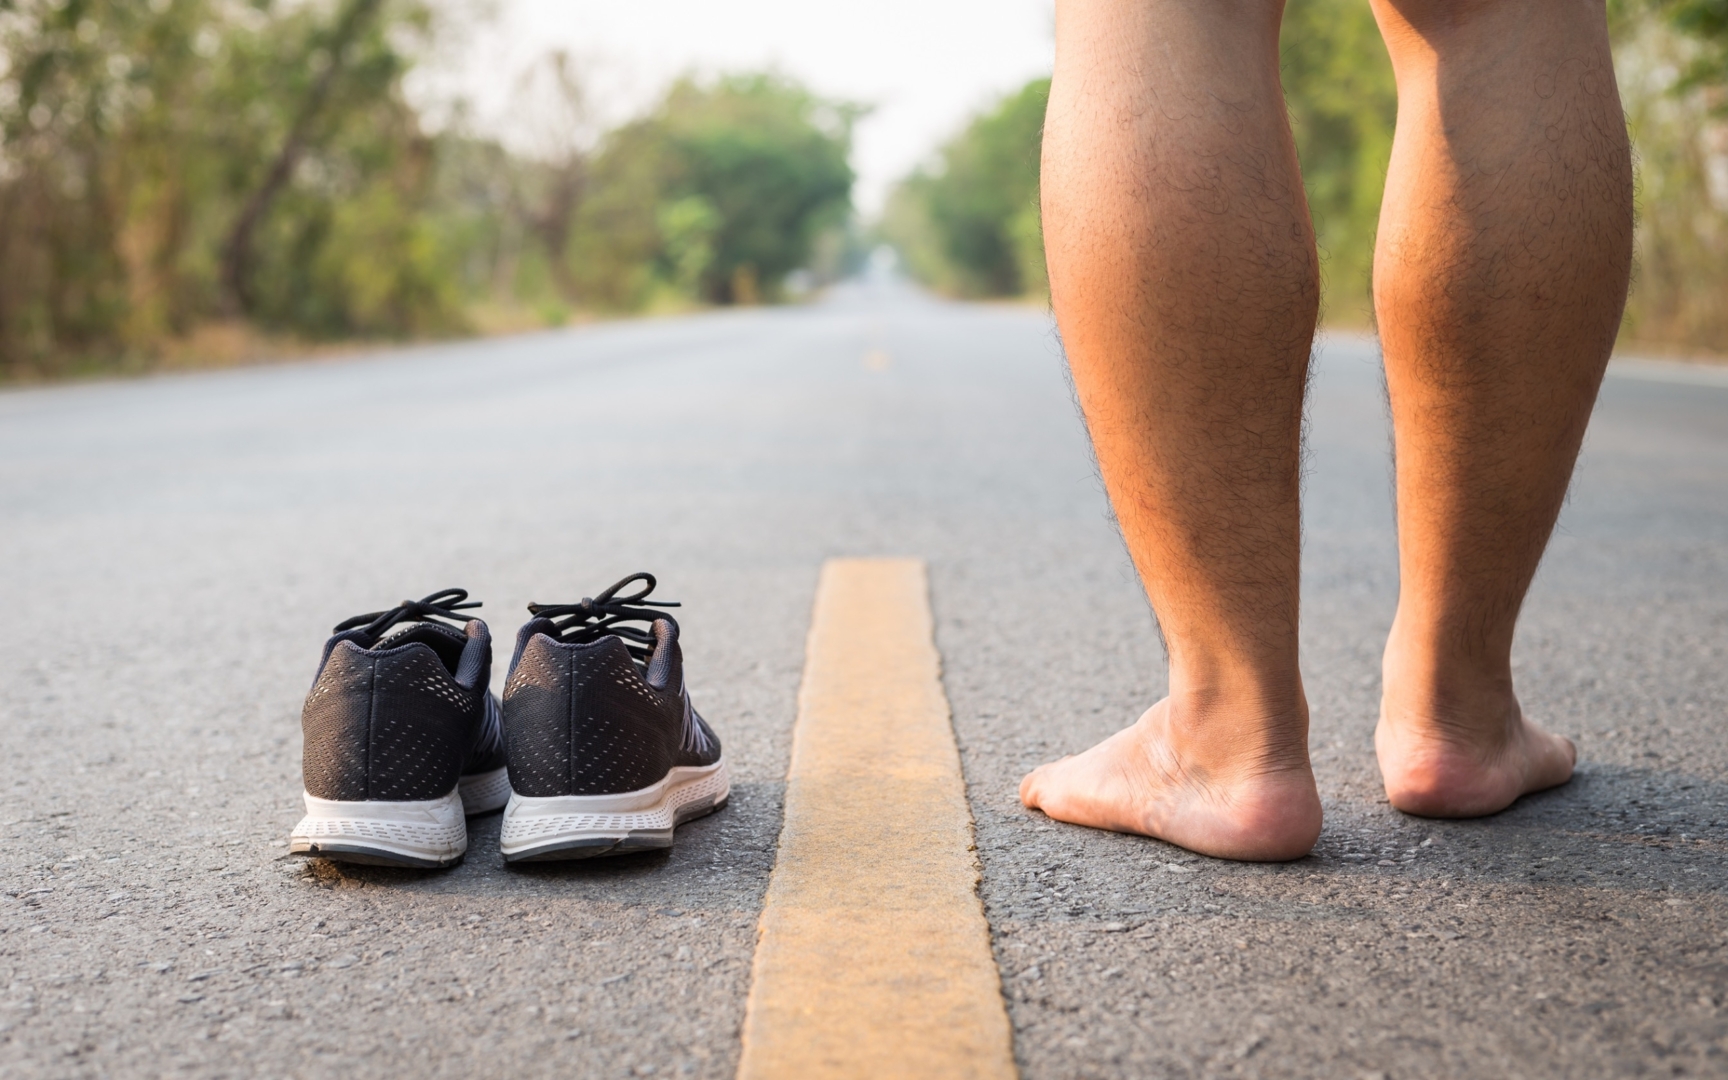 Barefoot running: Game-changer or fad?